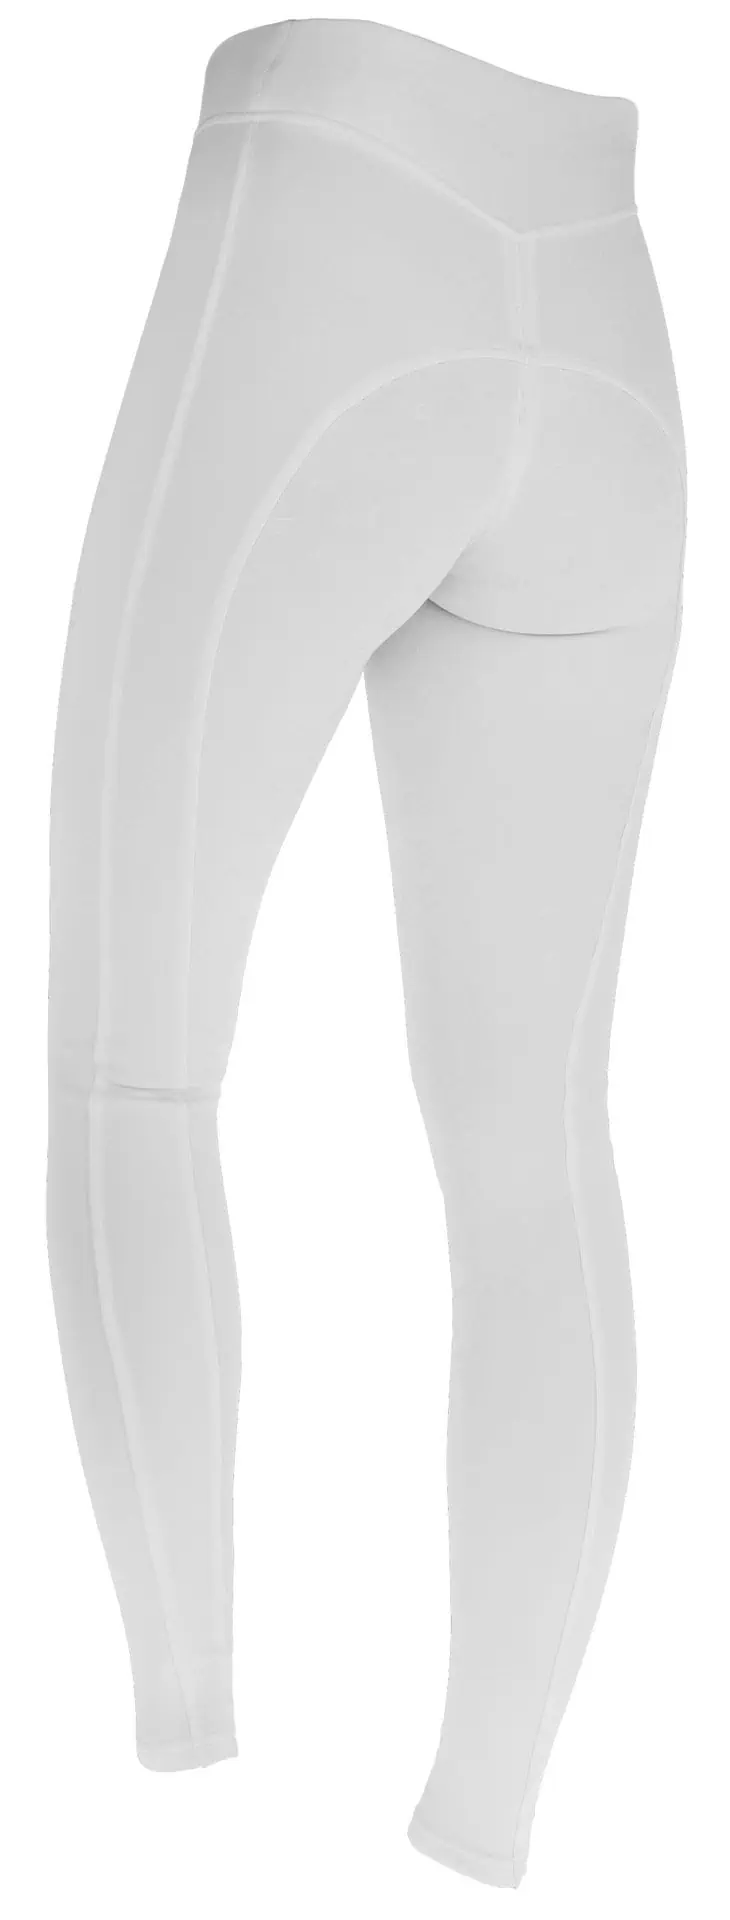 Riding Tights ClassicStar Ladies white, size 32/34